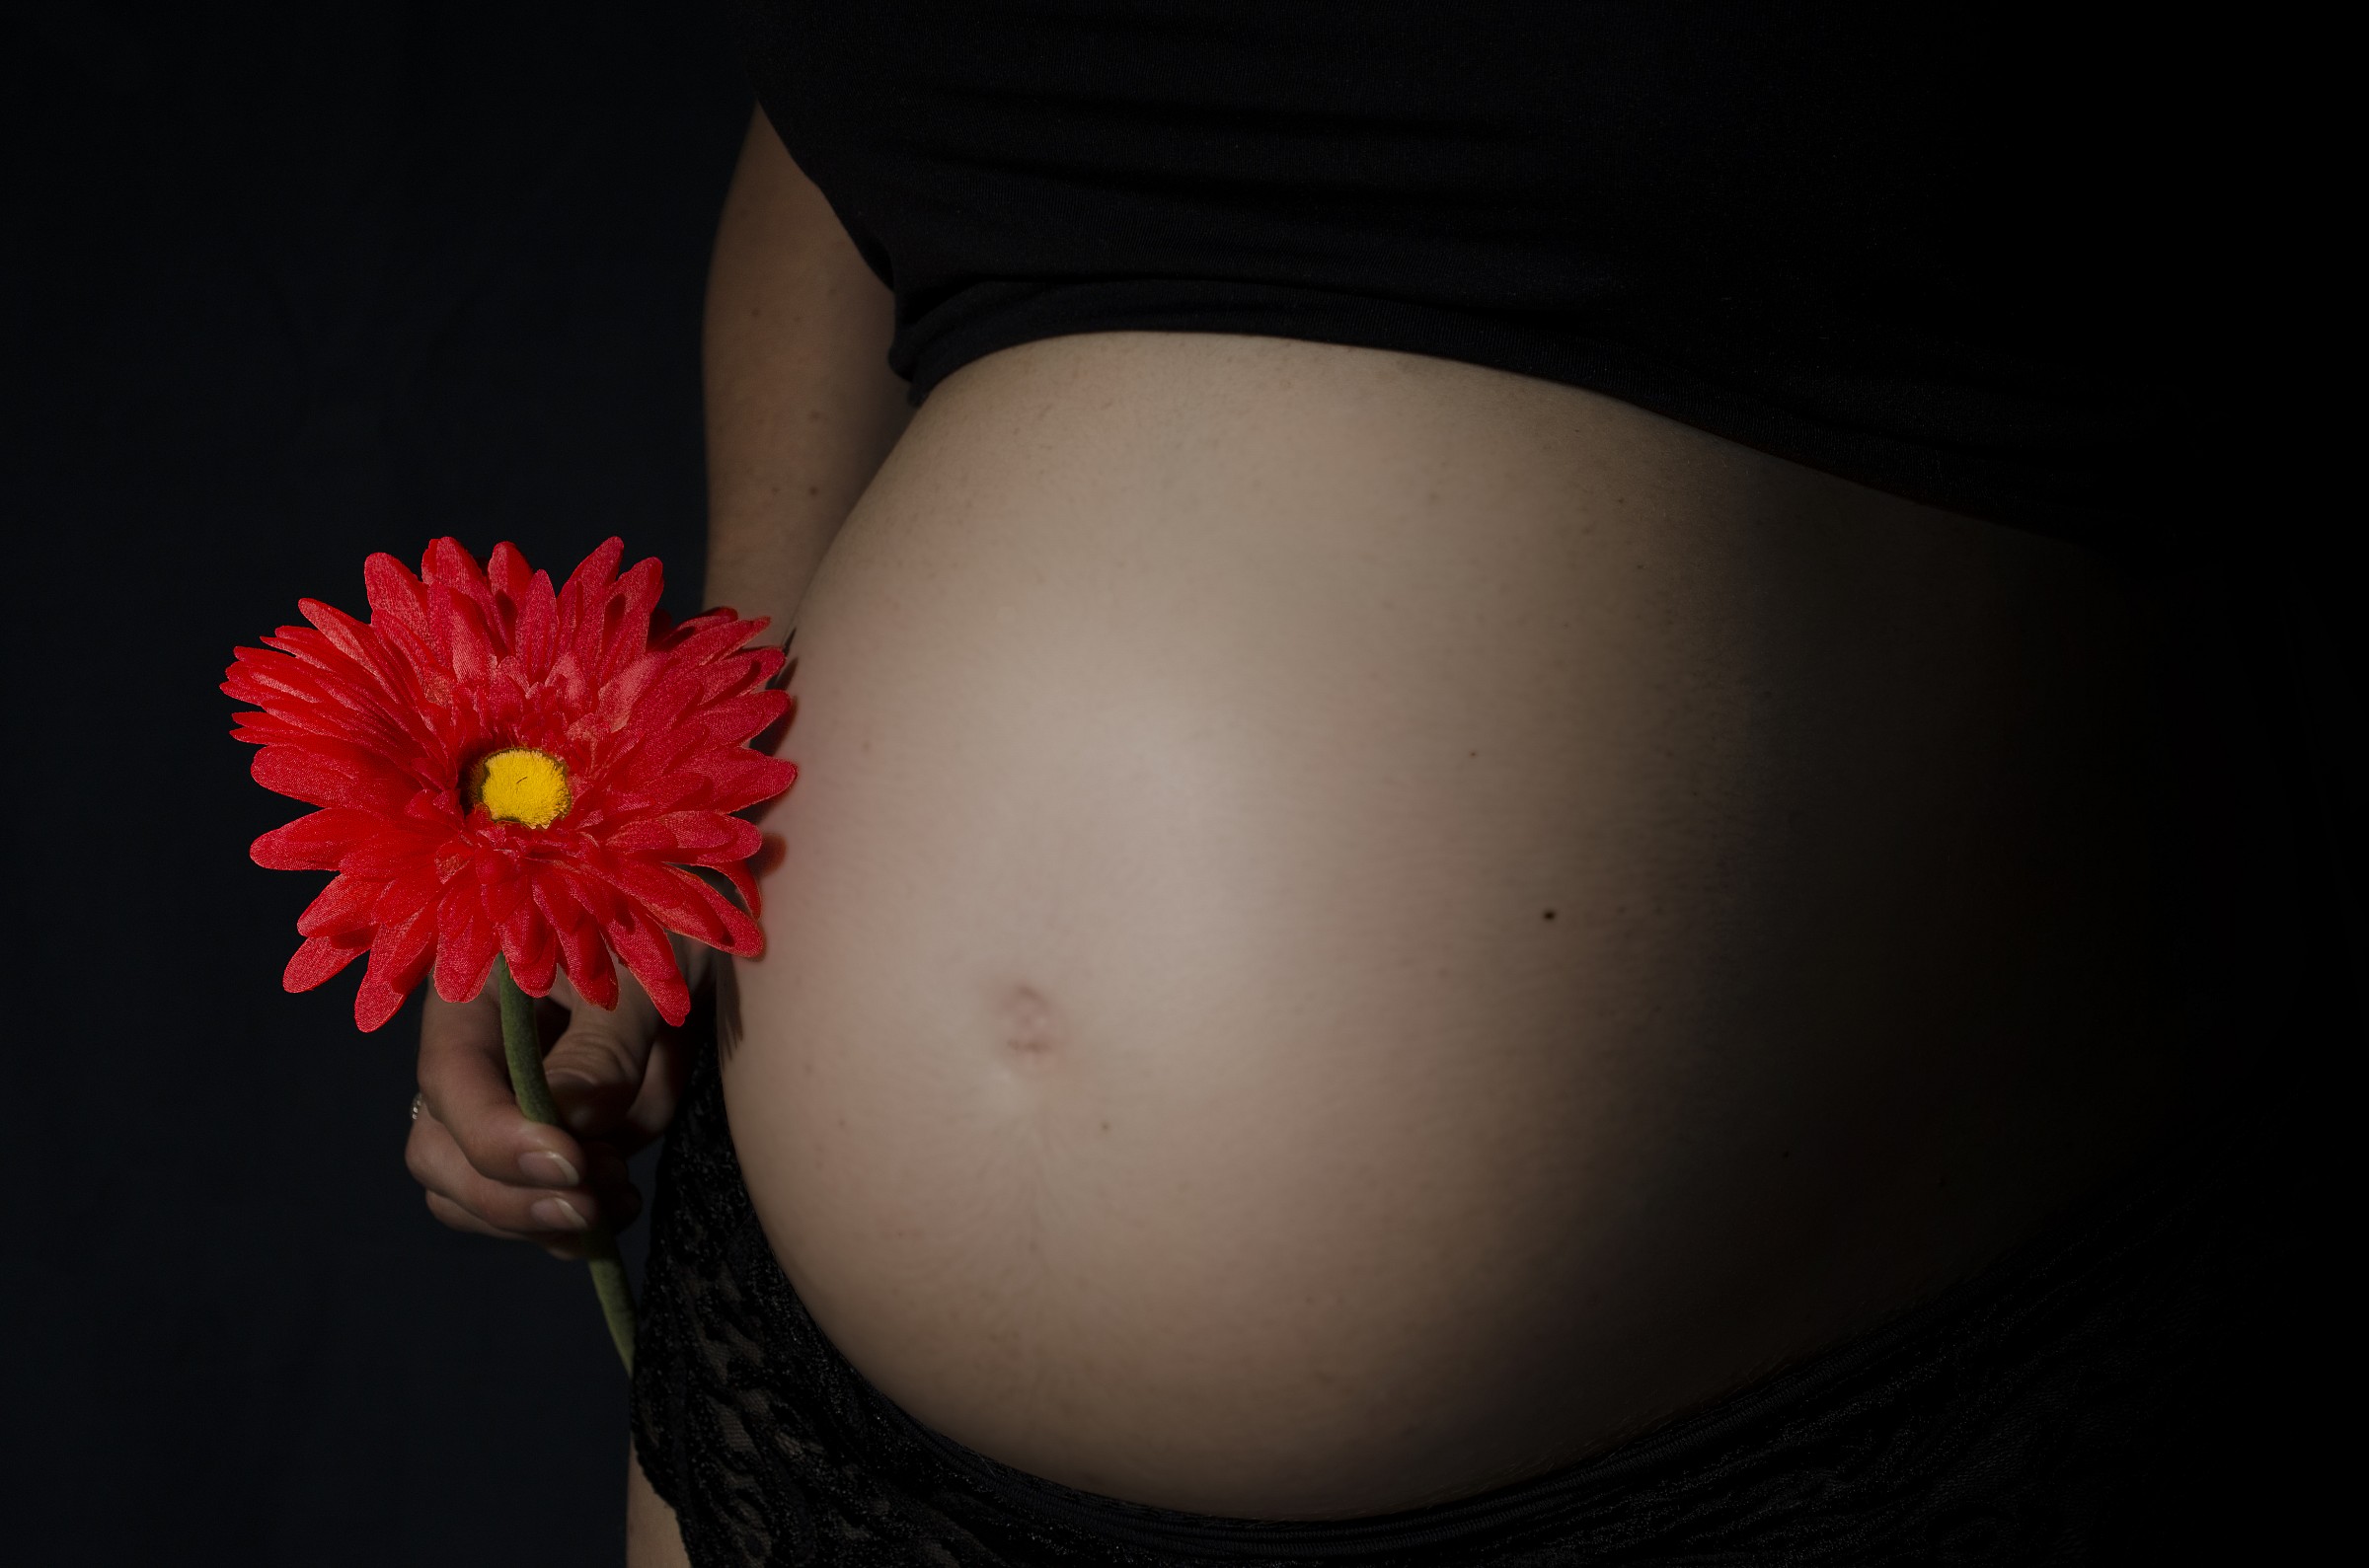 Pregnant and flower...